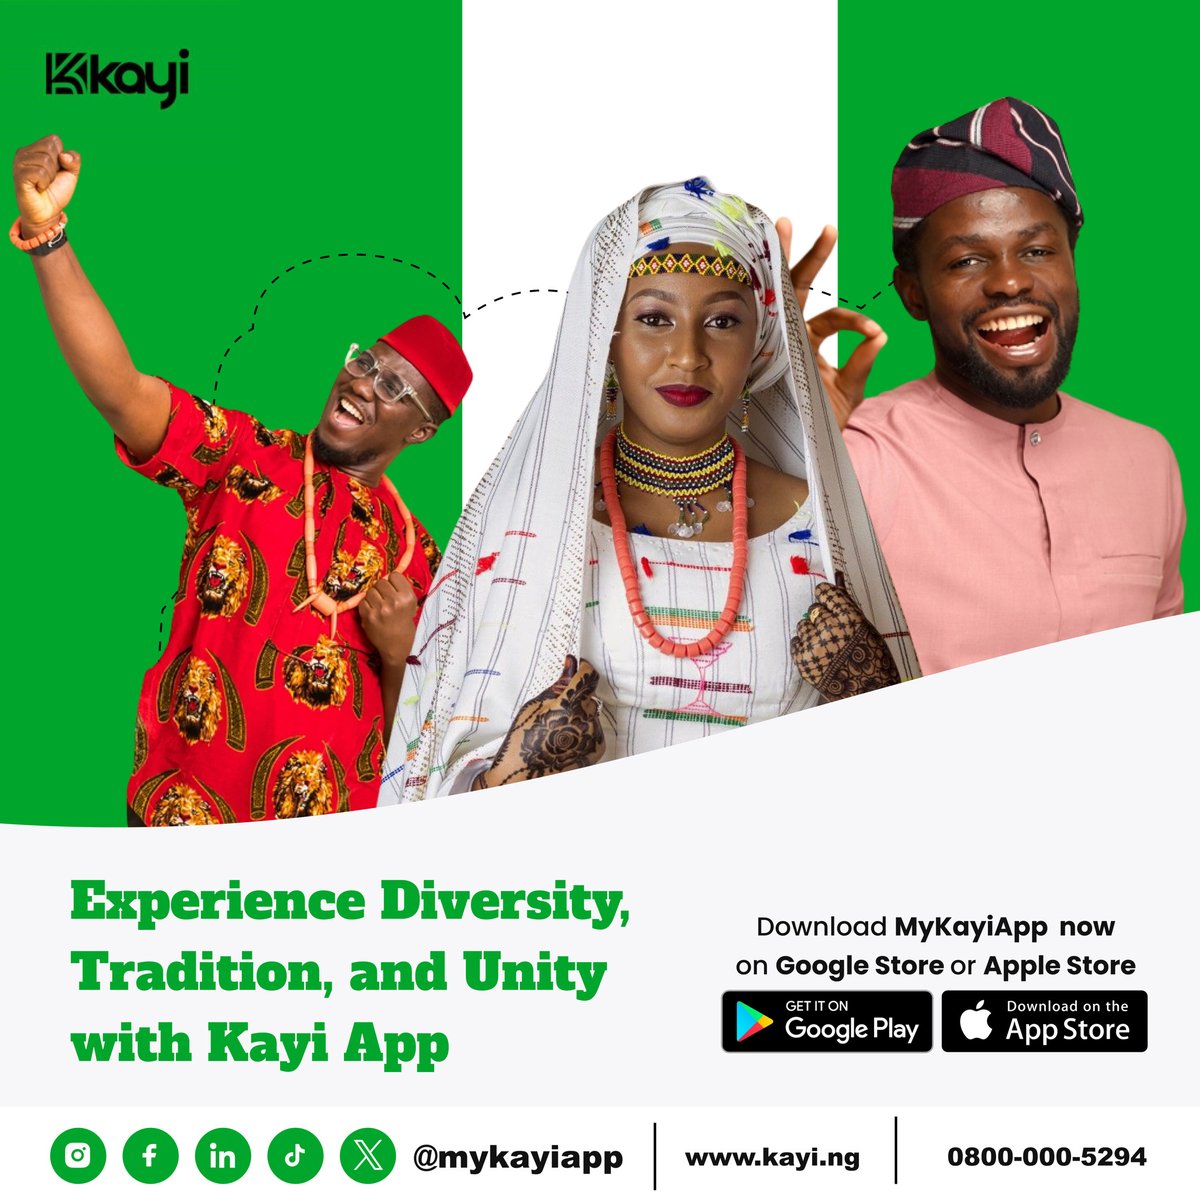 Immerse yourself in traditions, connect with heritage, and celebrate diversity.  Download MyKayiApp now on Google Store or Apple Store.

#MyKayiApp #NowLive #Kayiway #DownloadNow #Bankingwithoutlimits #downloadmykayiapp